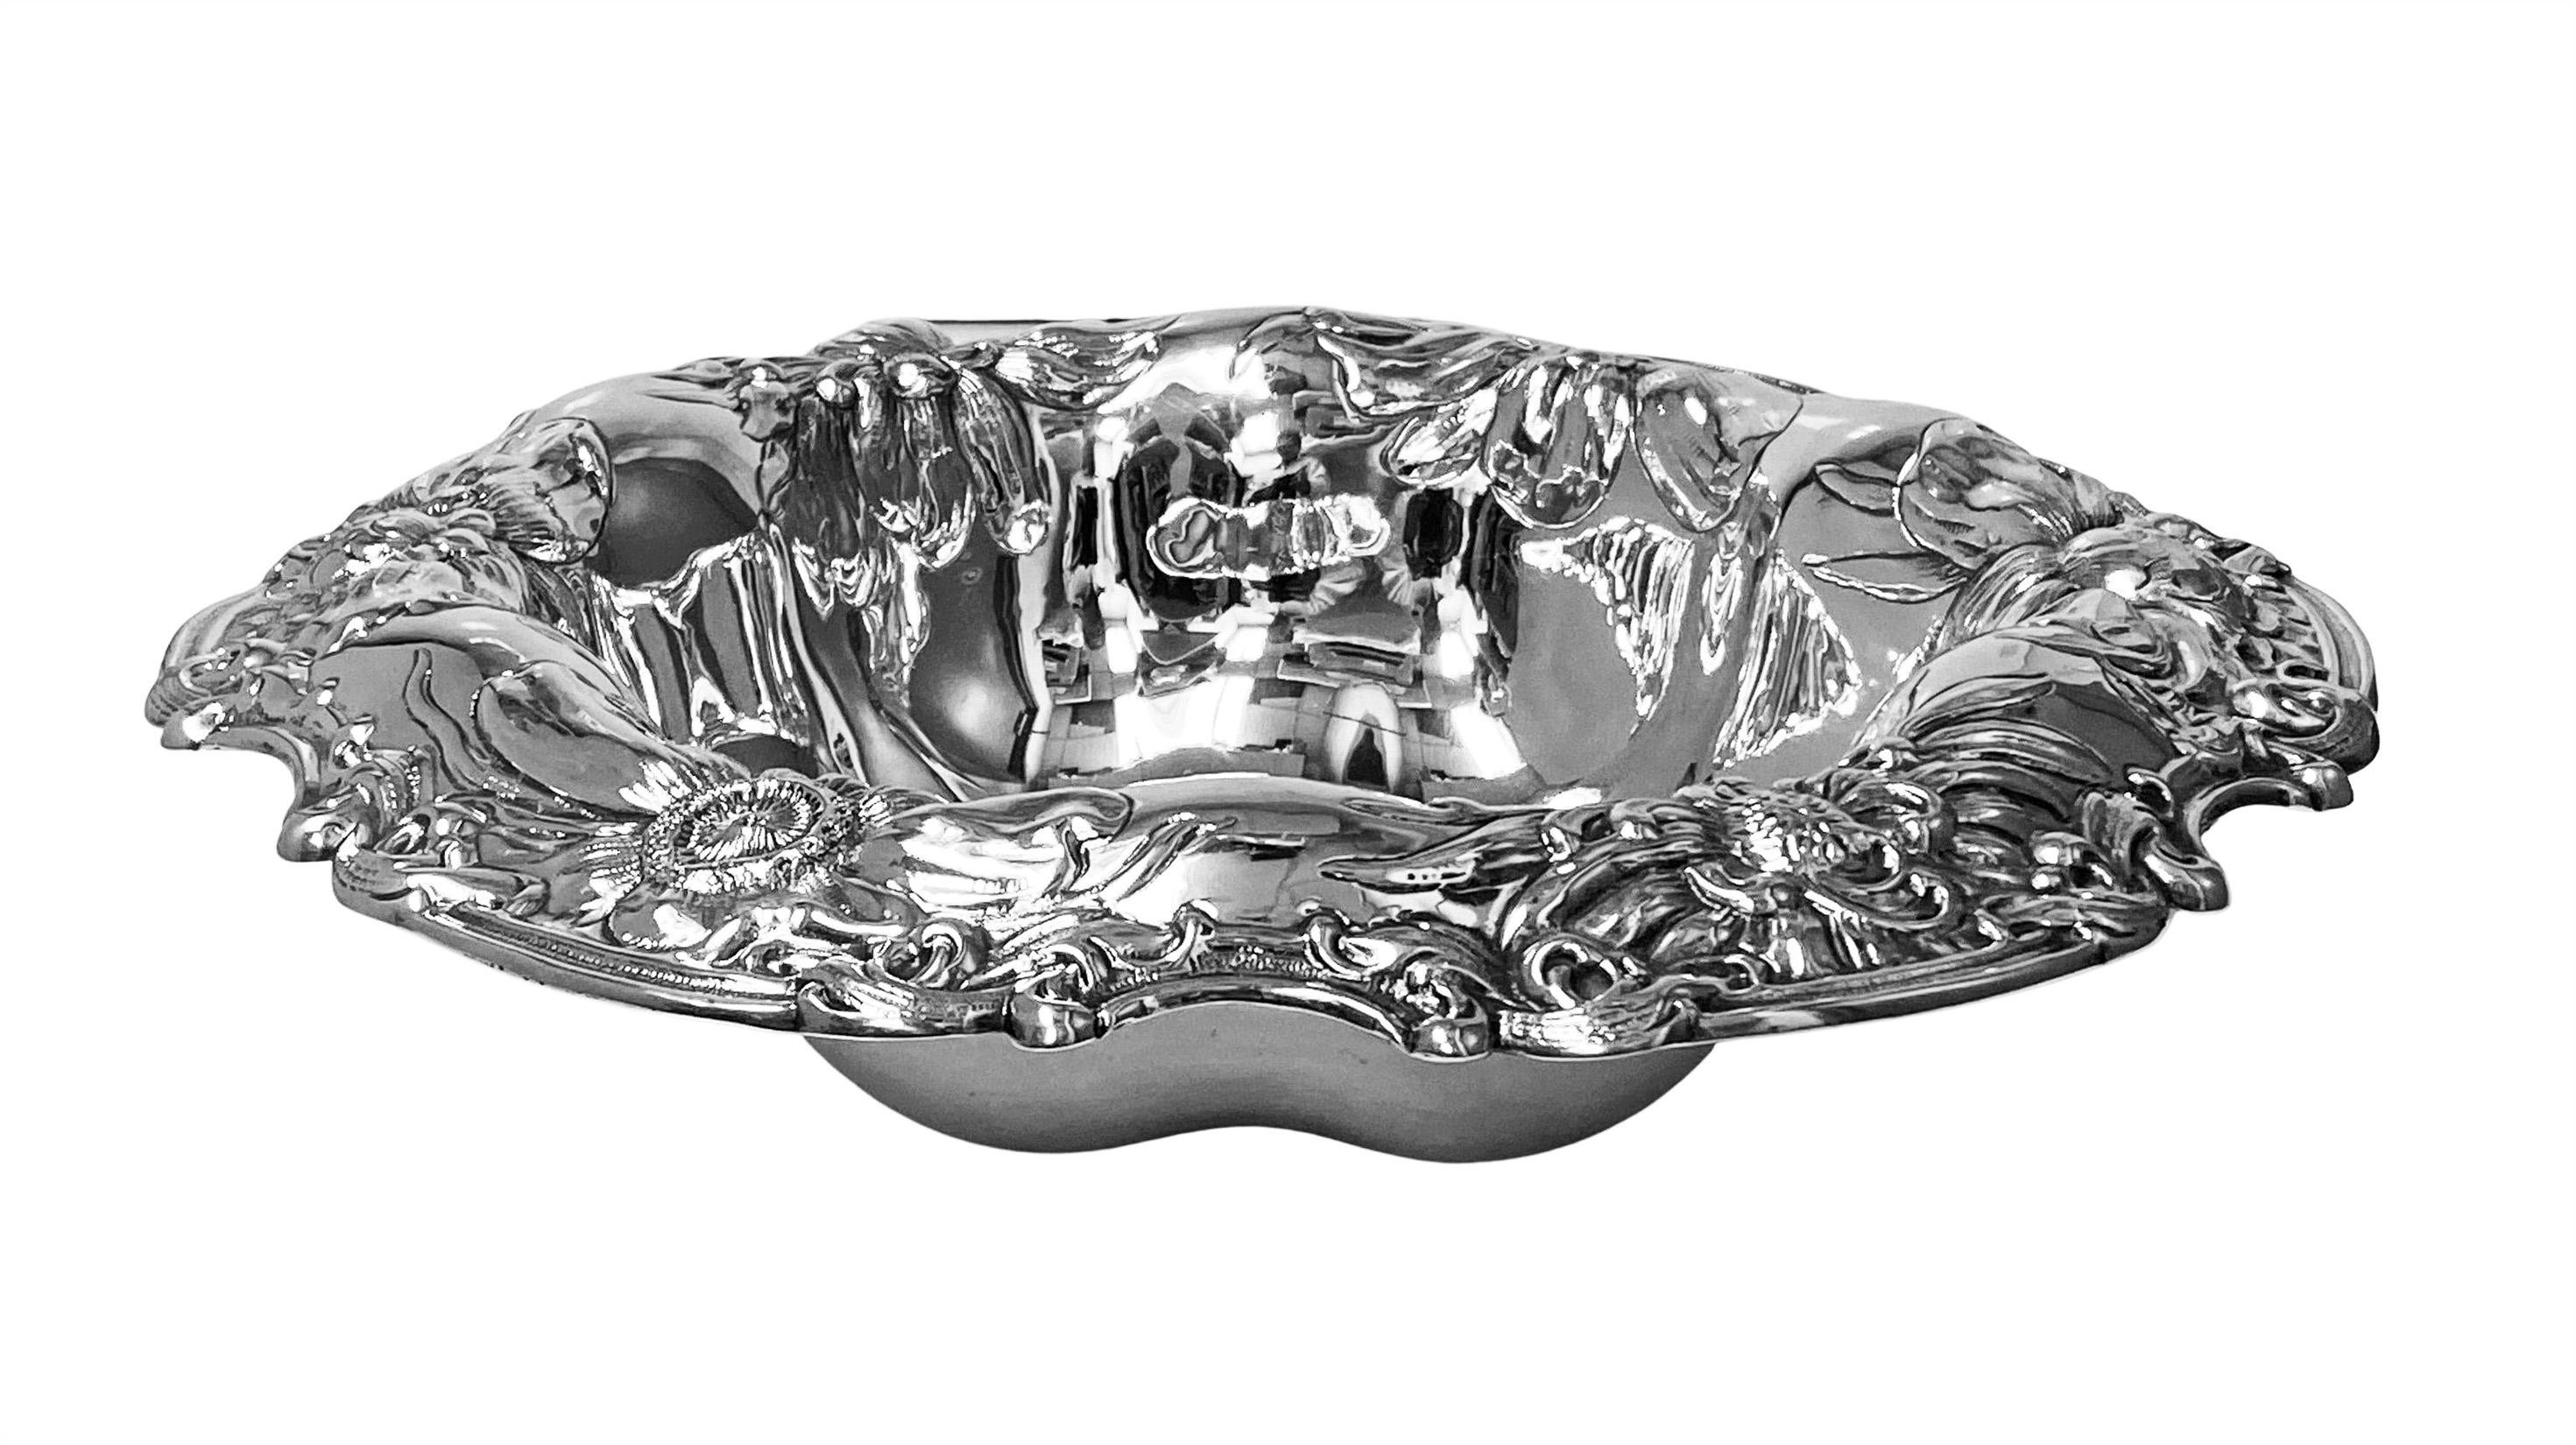 Gorham large Art Nouveau sterling silver Floral decorated bowl C.1900. The deep bowl of round scalloped form beautifully embossed and chased with overlapping floral decoration. Full Gorham marks to underside and numbered 816C. Measures: Diameter: 12